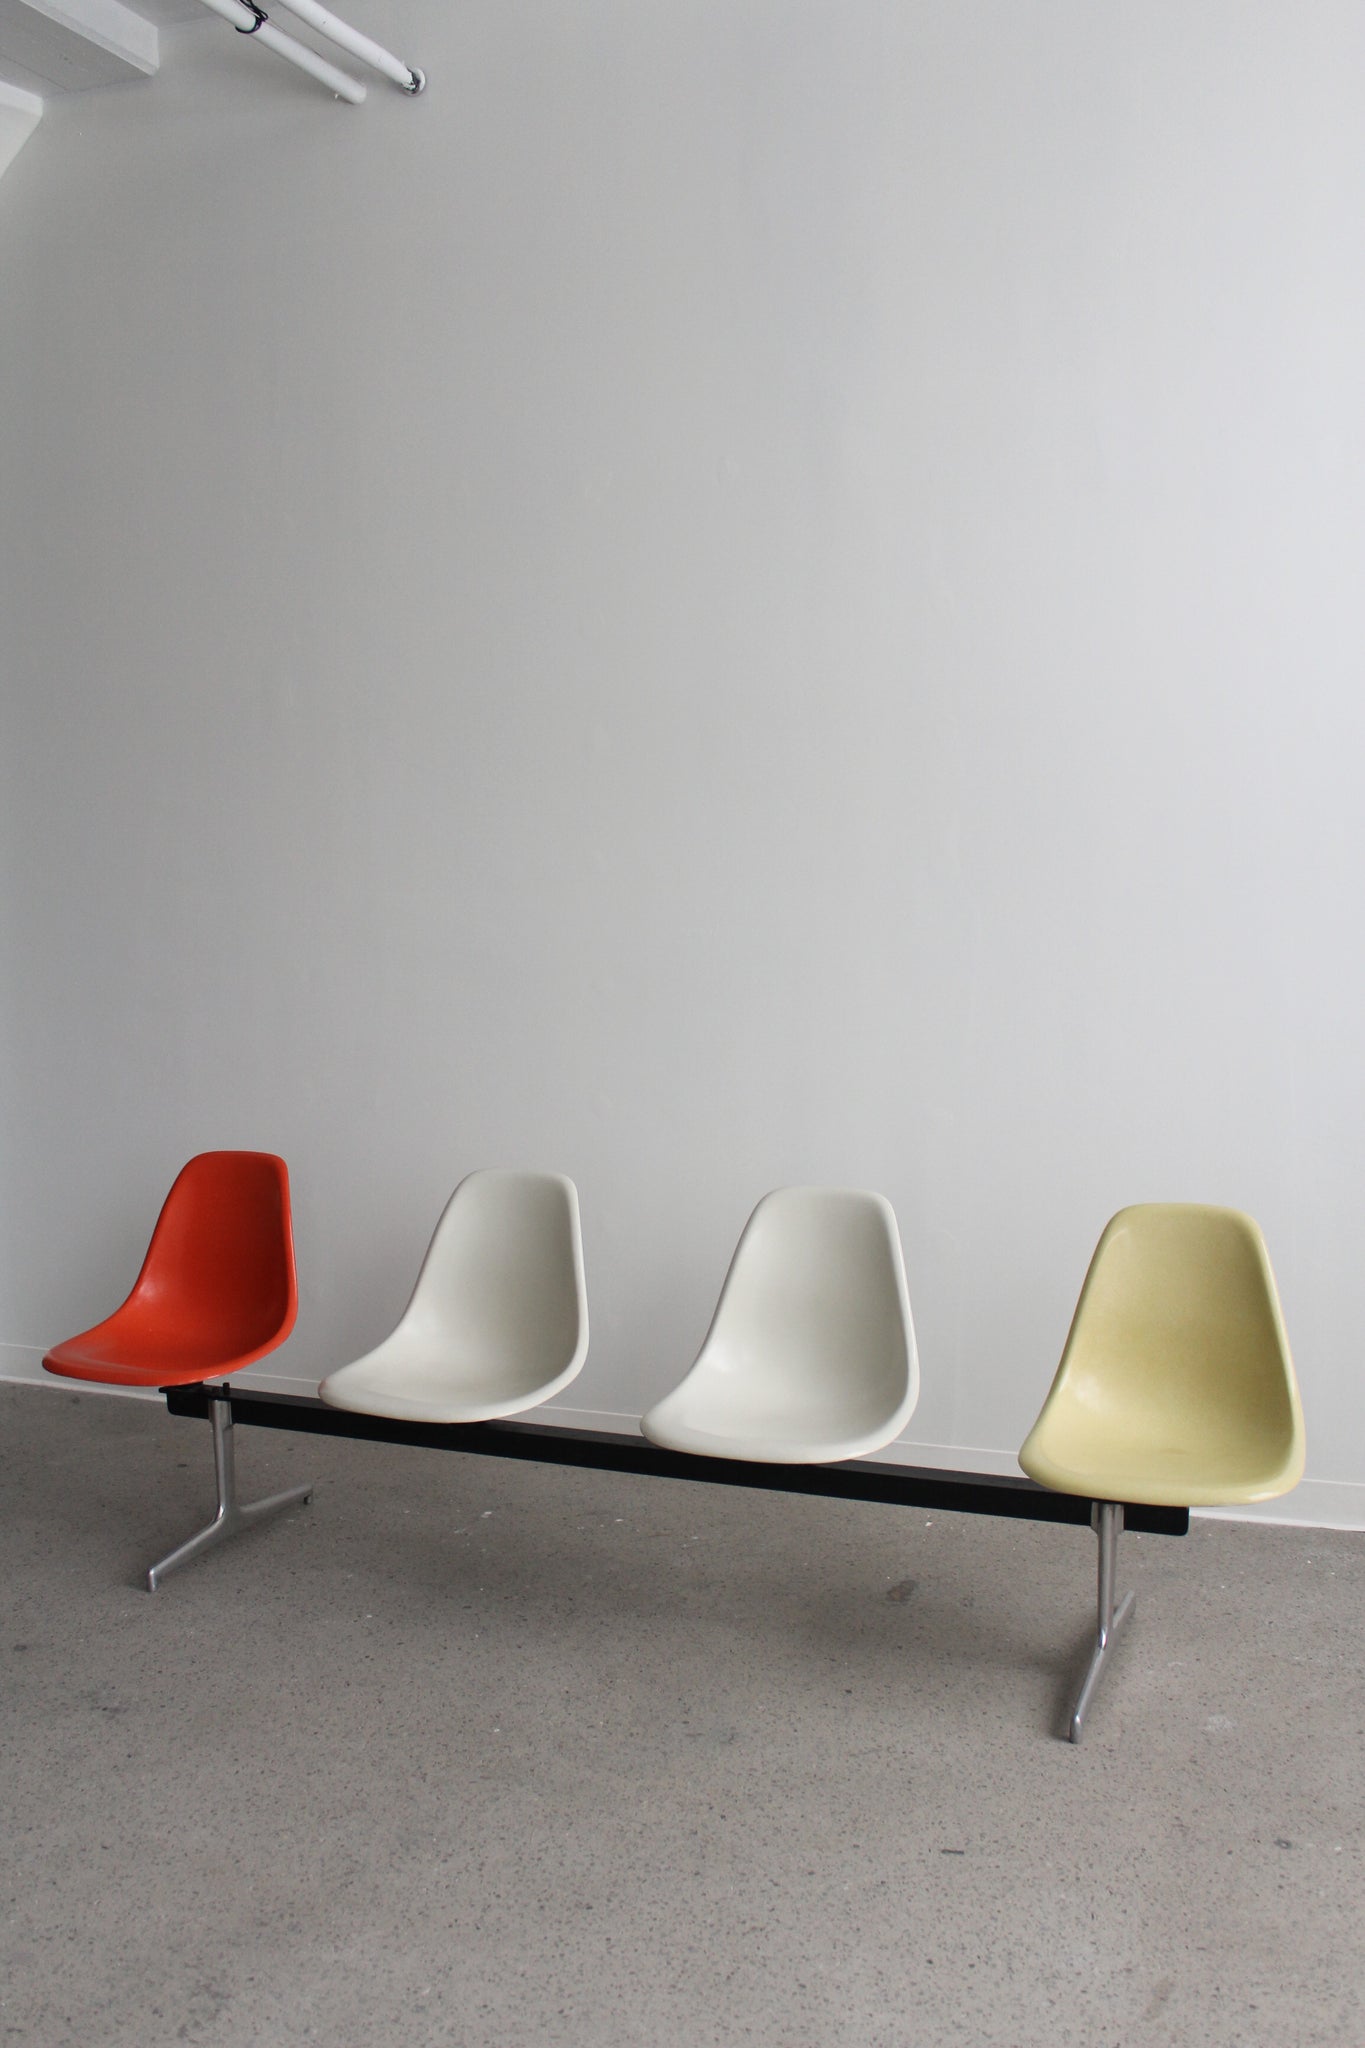 Tandem Bench by Charles and Ray Eames for Herman Miller